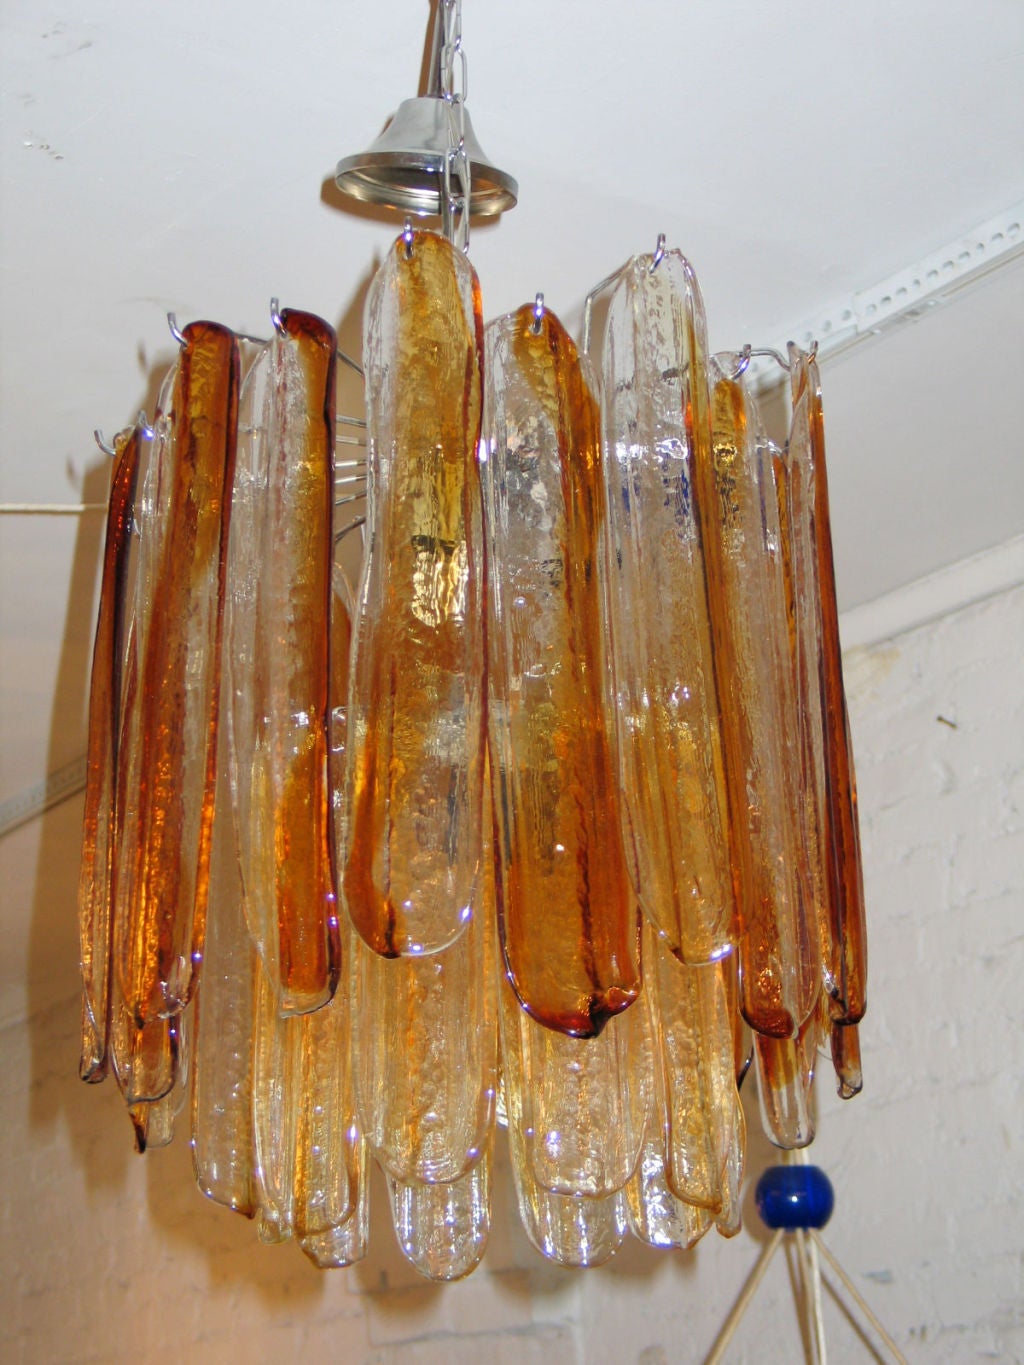 Italian Mid-Century Modern amber colored glass chandelier handblown in Murano by Mazzega. This Piece has a double layer of glass and imparts a warm light. The inner layer has ten pieces and the outer layer has 24 long pieces with both forming an